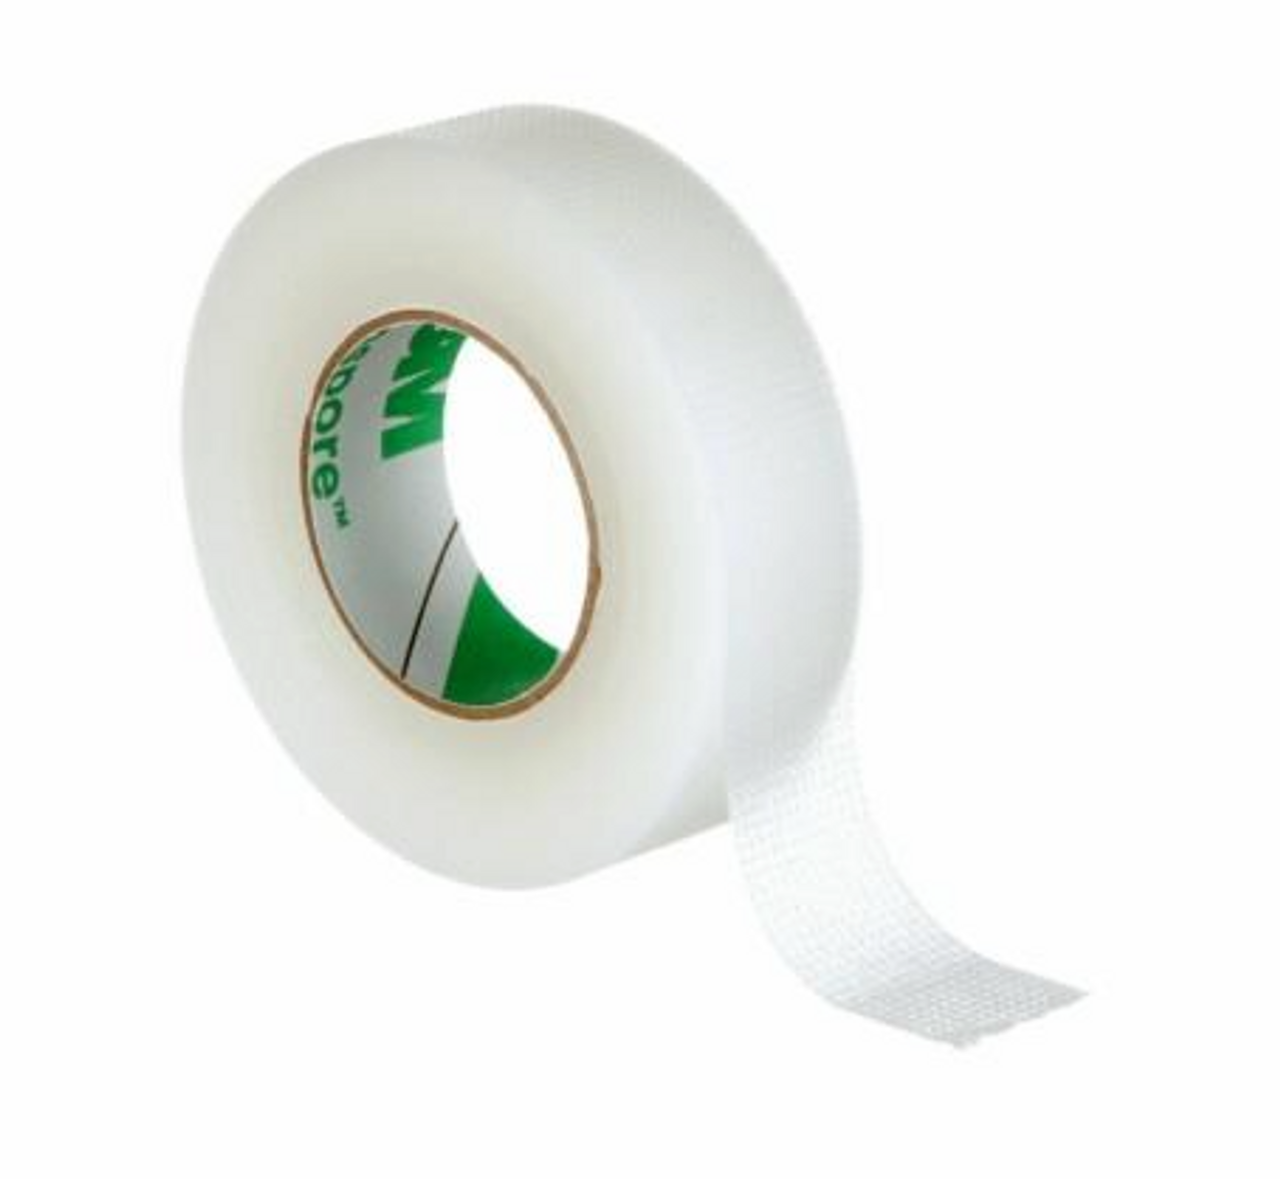 3M 827 Pouch Tape Rolls, 5 x 8 for $58.00 Online